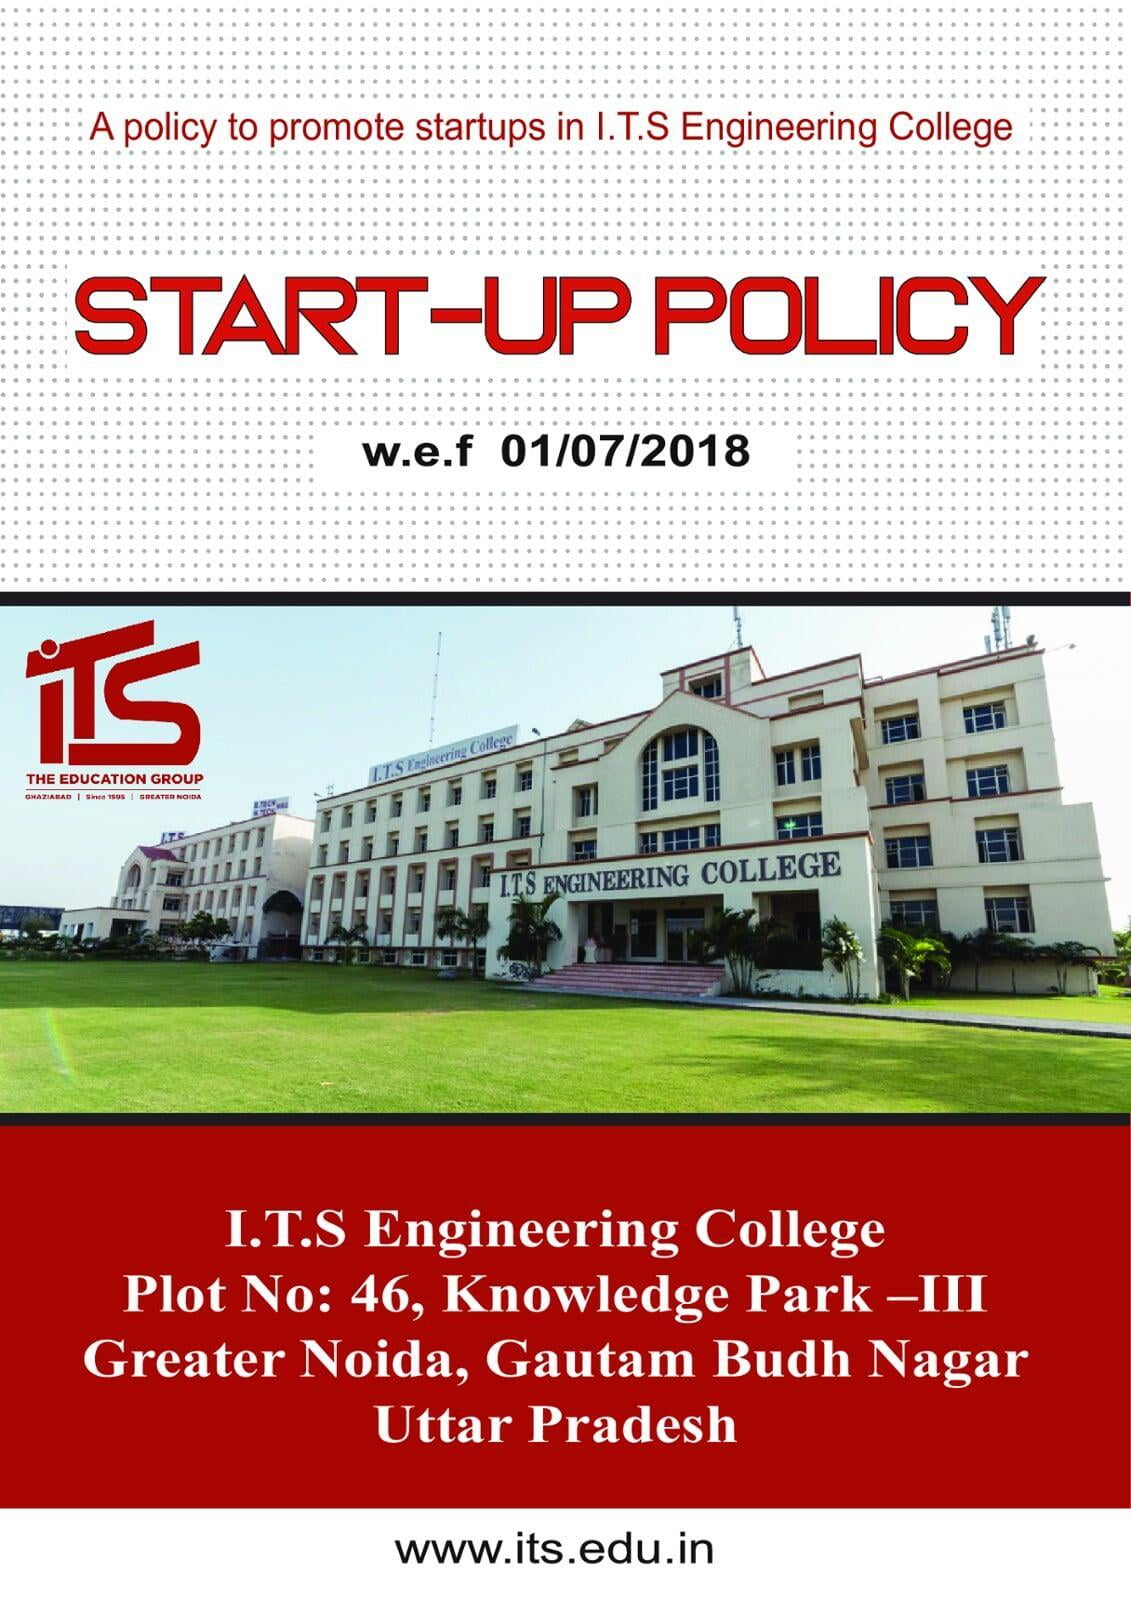 Start UP Policy by ITS Engineering College